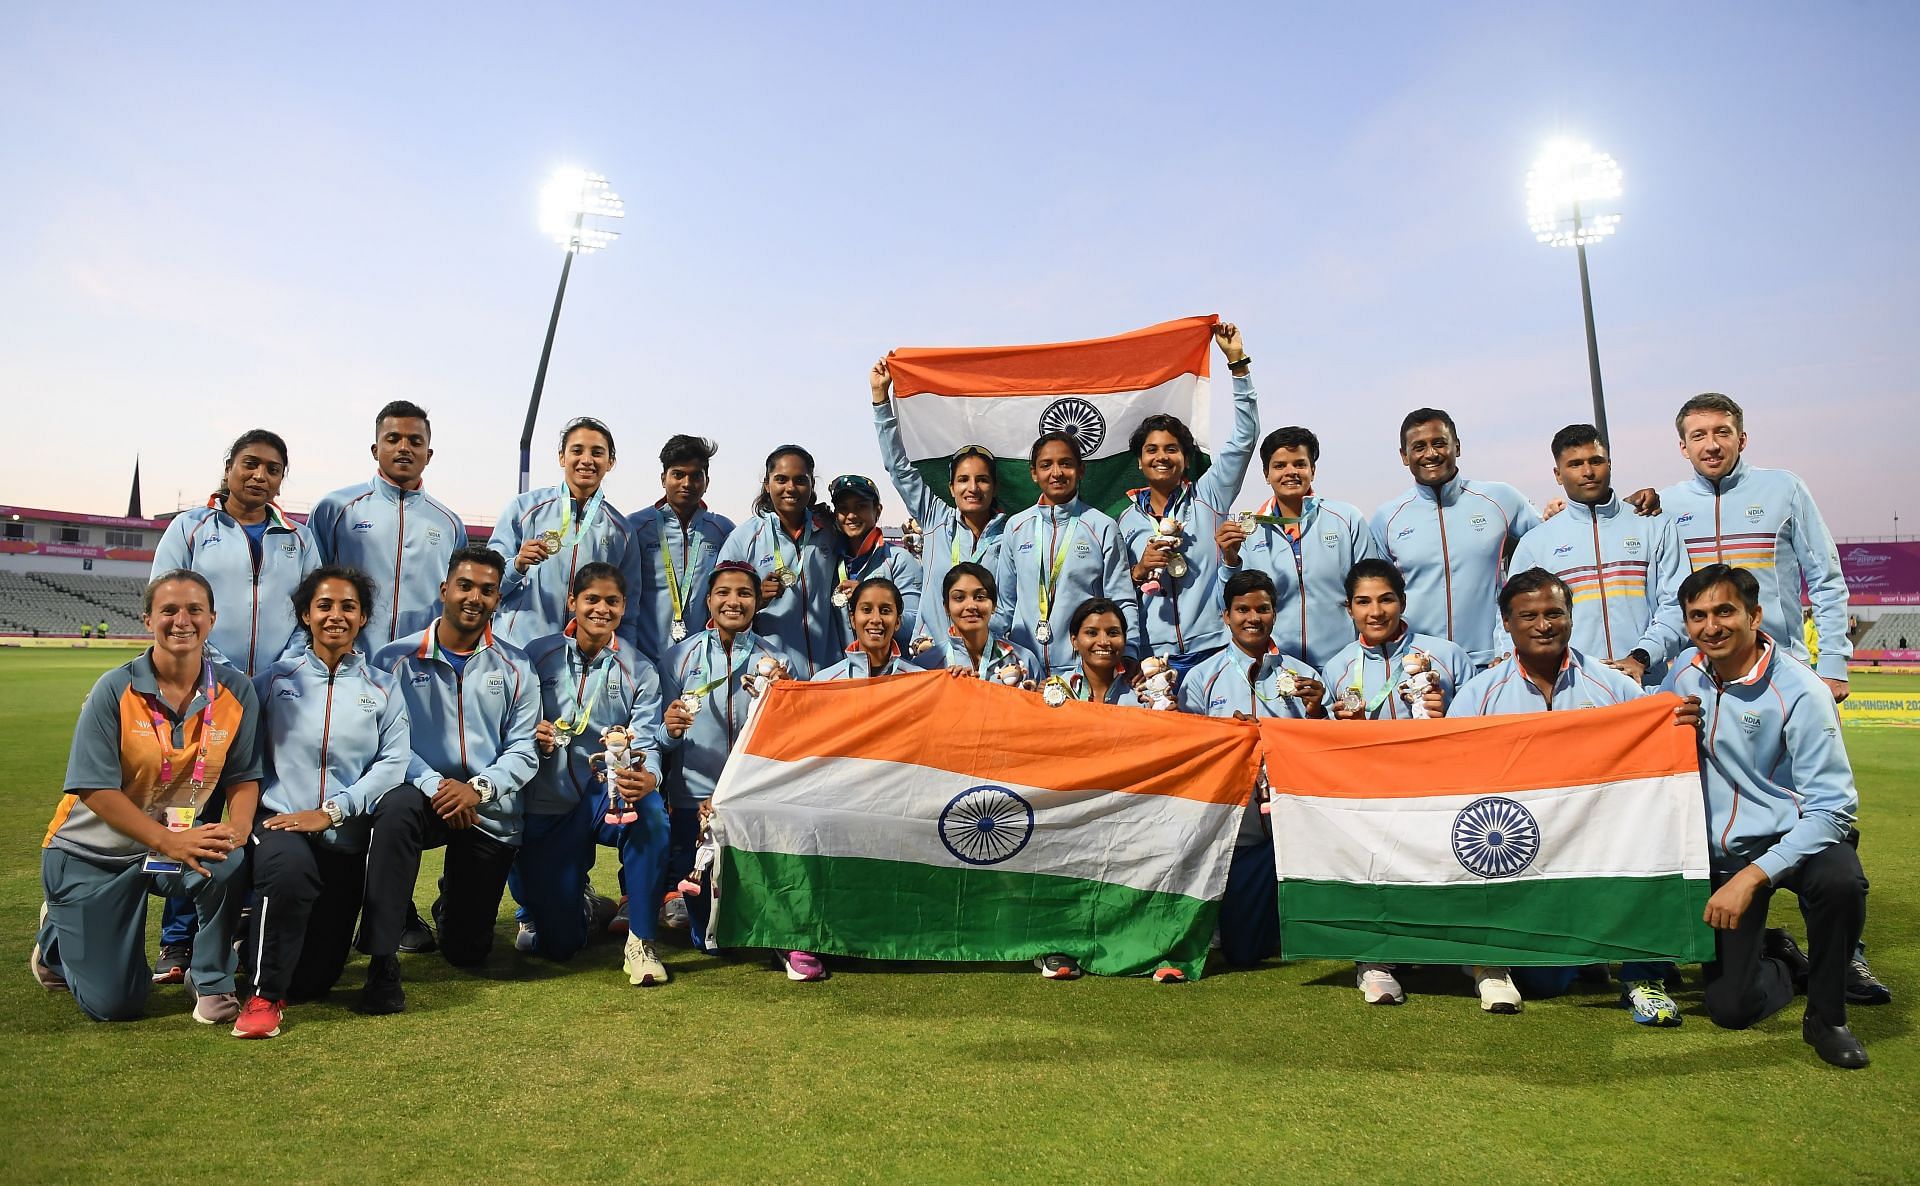 The women&#039;s team won India&#039;s first cricket medal at the Commonwealth Games